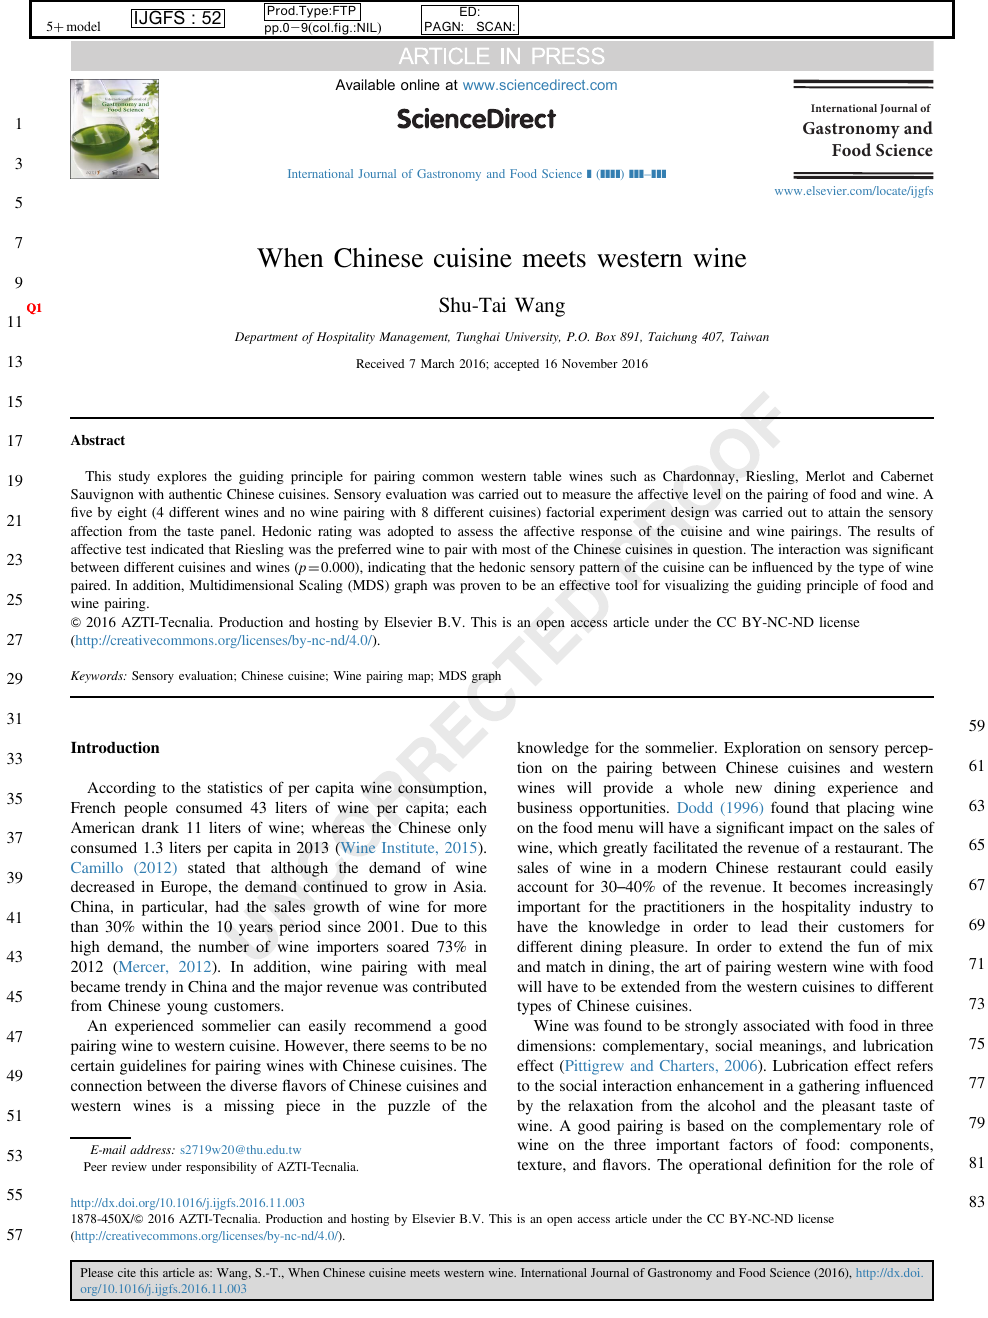 When Chinese Cuisine Meets Western Wine Topic Of Research Paper In Agriculture Forestry And Fisheries Download Scholarly Article Pdf And Read For Free On Cyberleninka Open Science Hub